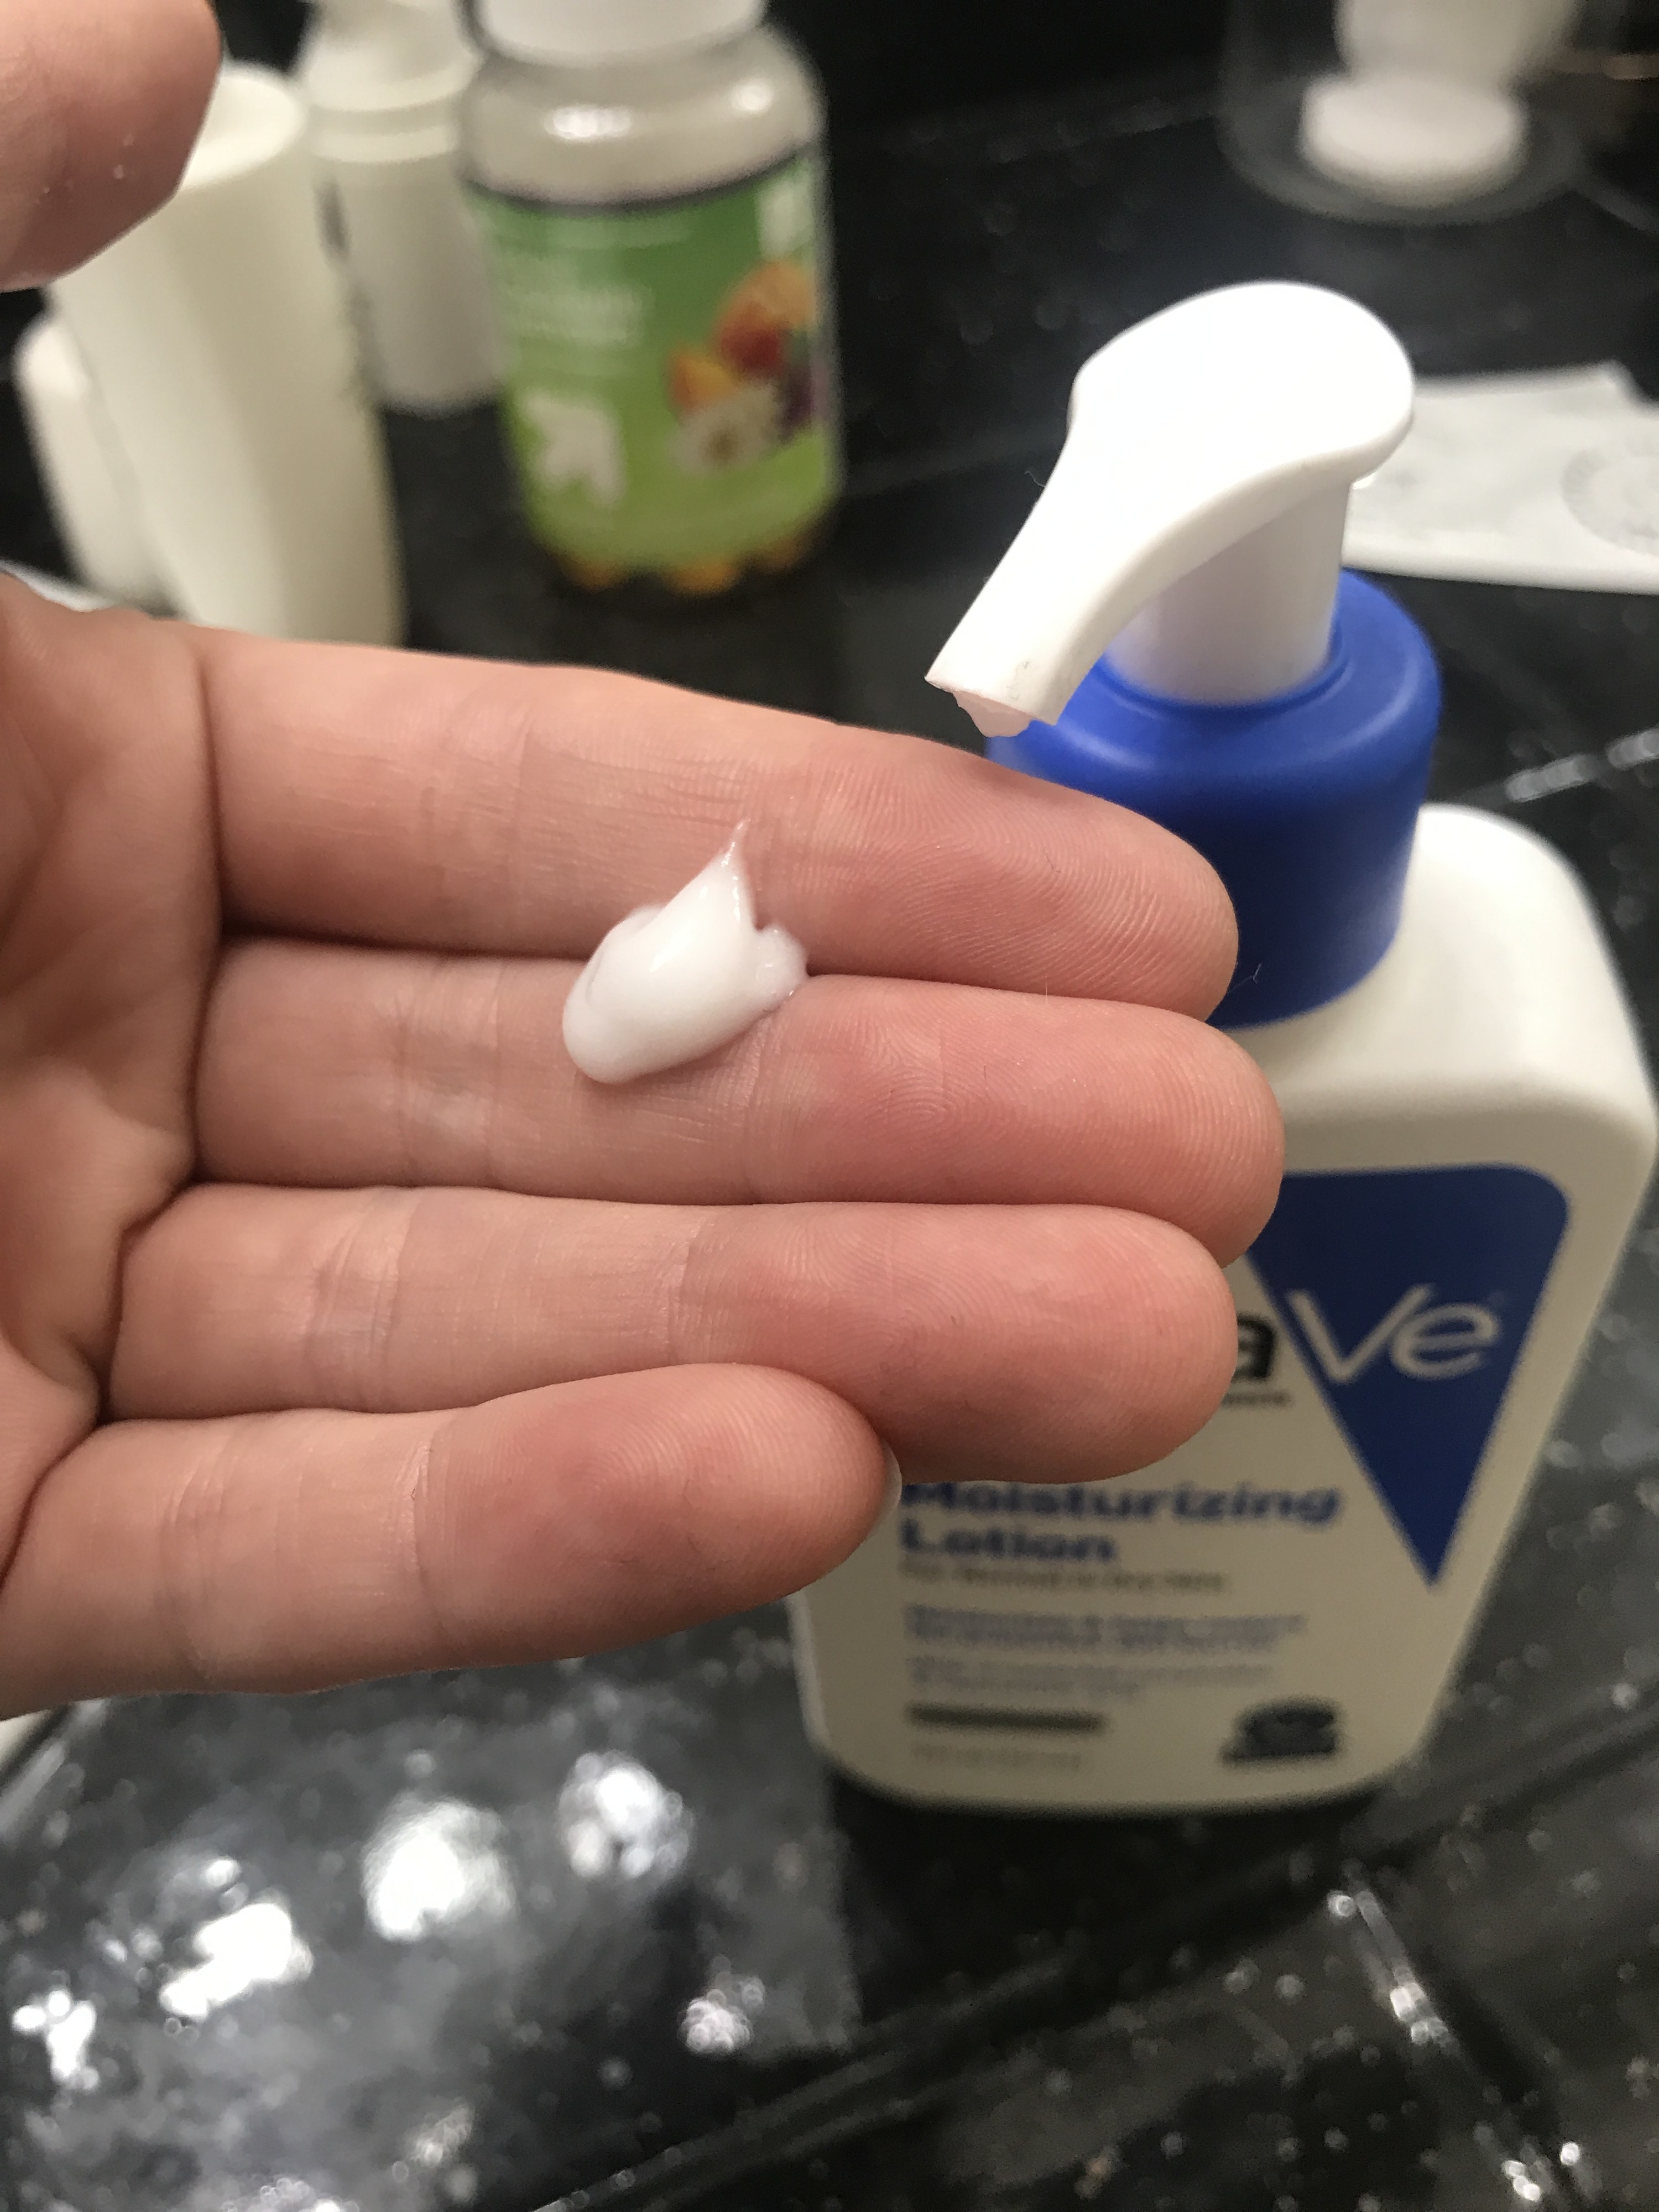 Half a pump of Cera Ve lotion in an open hand